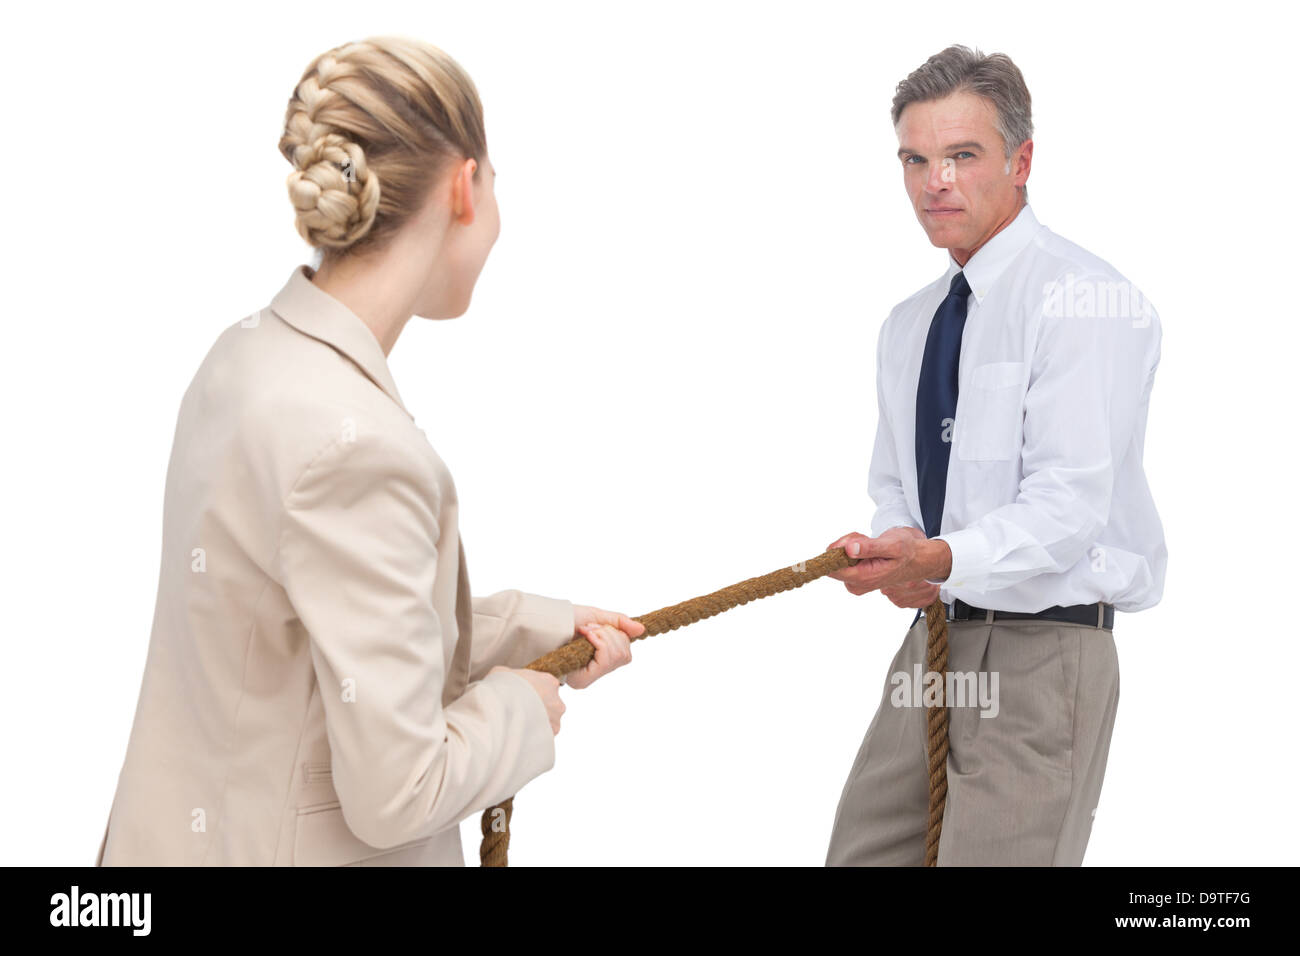 Business people compete a tug of war Stock Photo